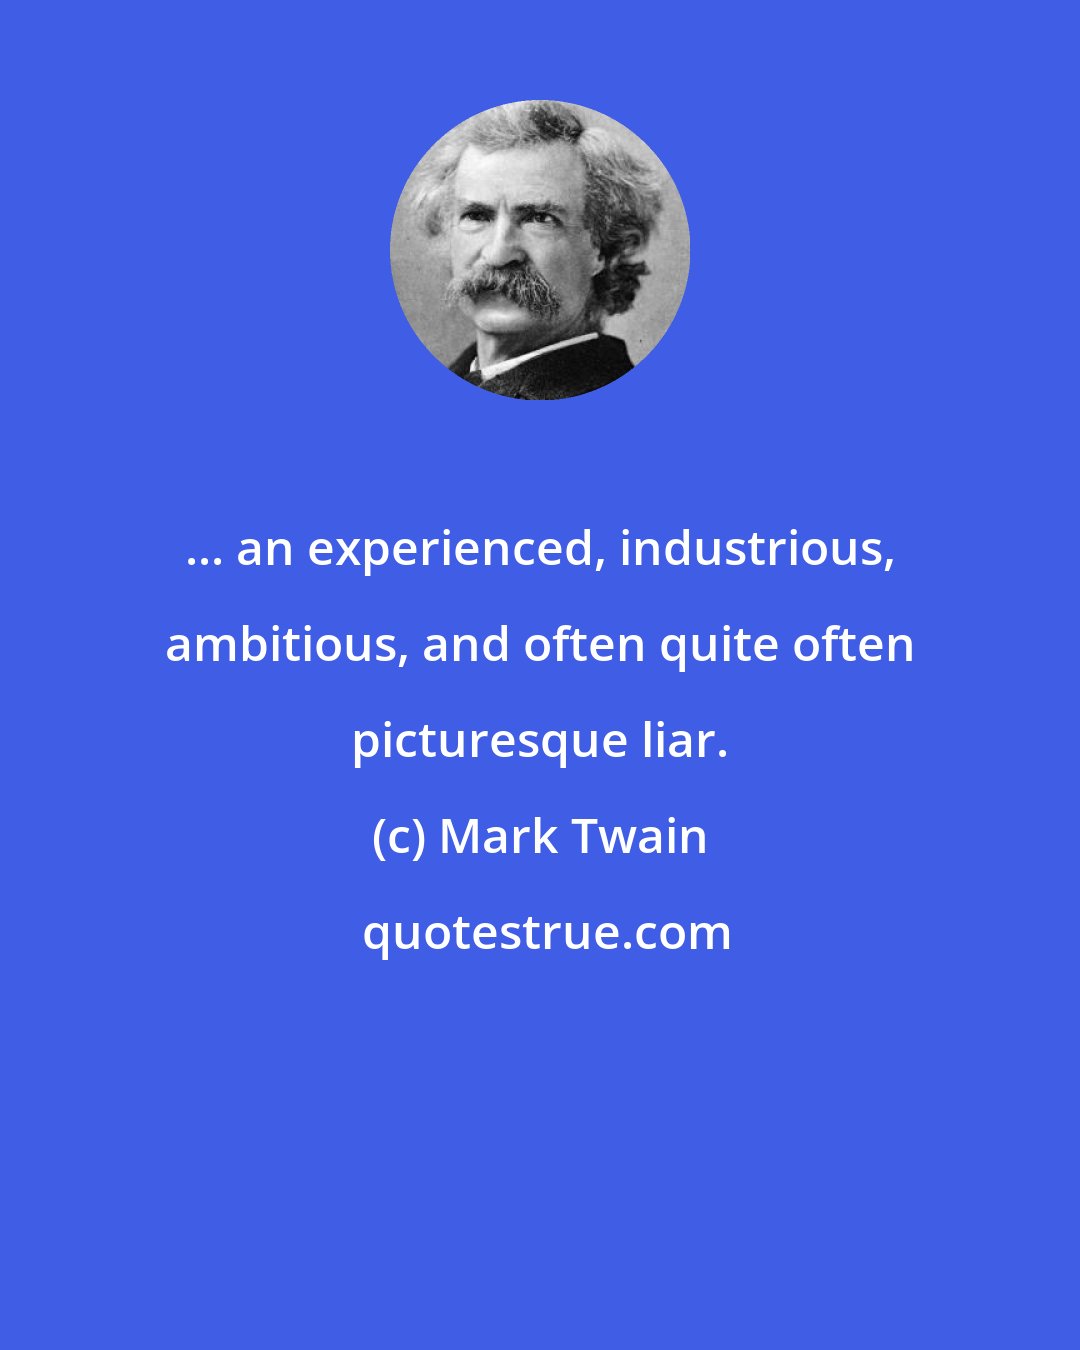 Mark Twain: ... an experienced, industrious, ambitious, and often quite often picturesque liar.